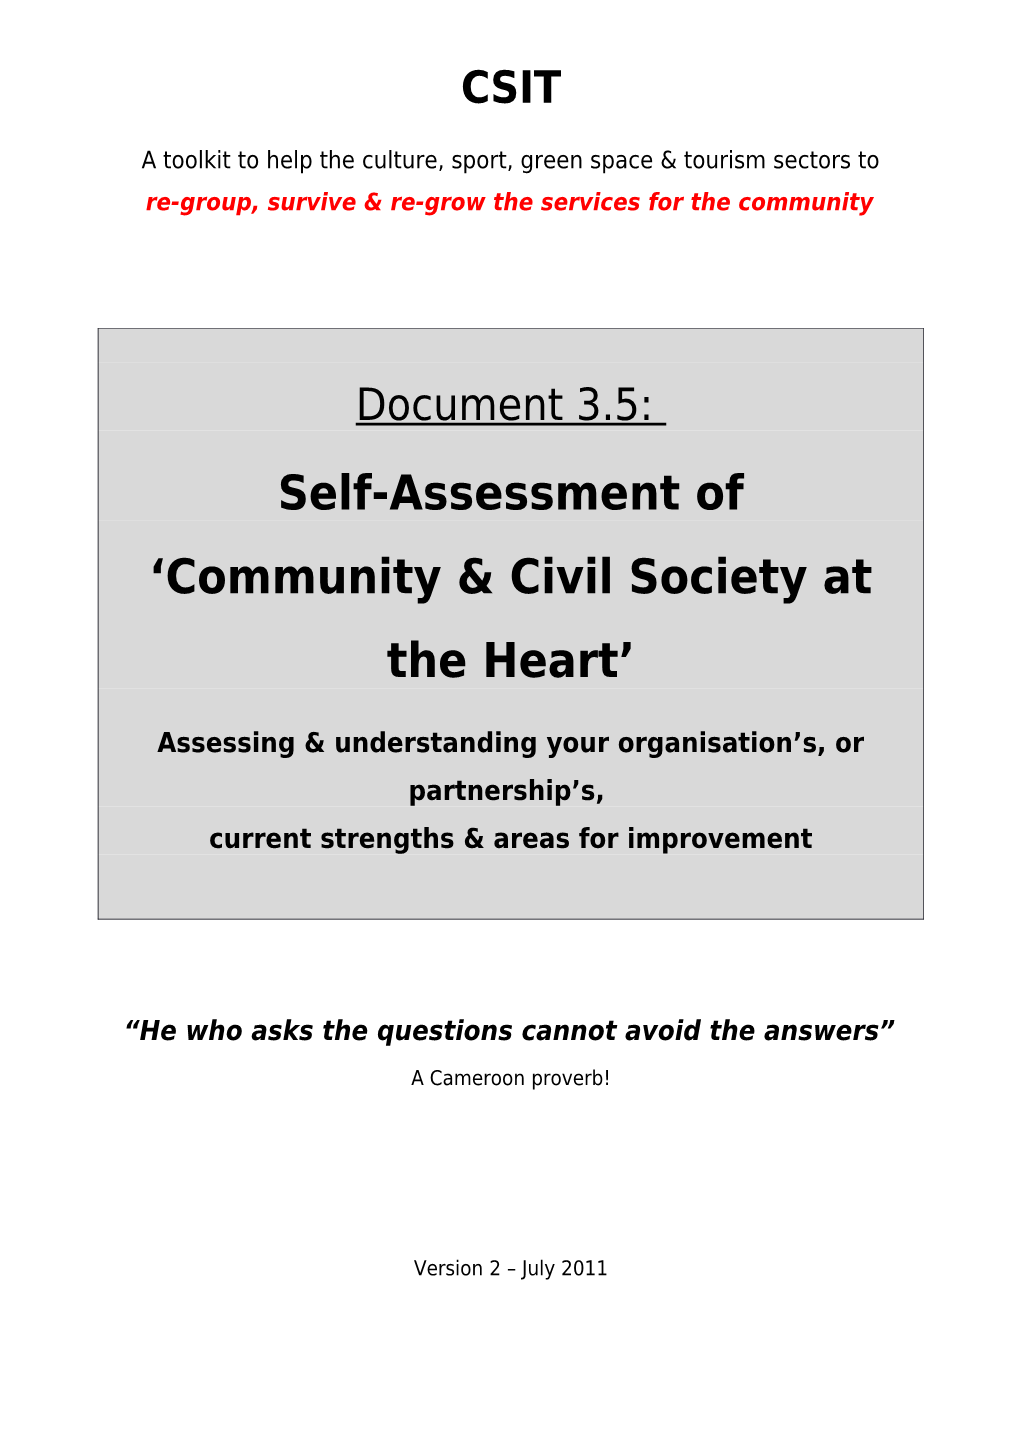 Red Thread Two: Community & Civil Society at the Heart